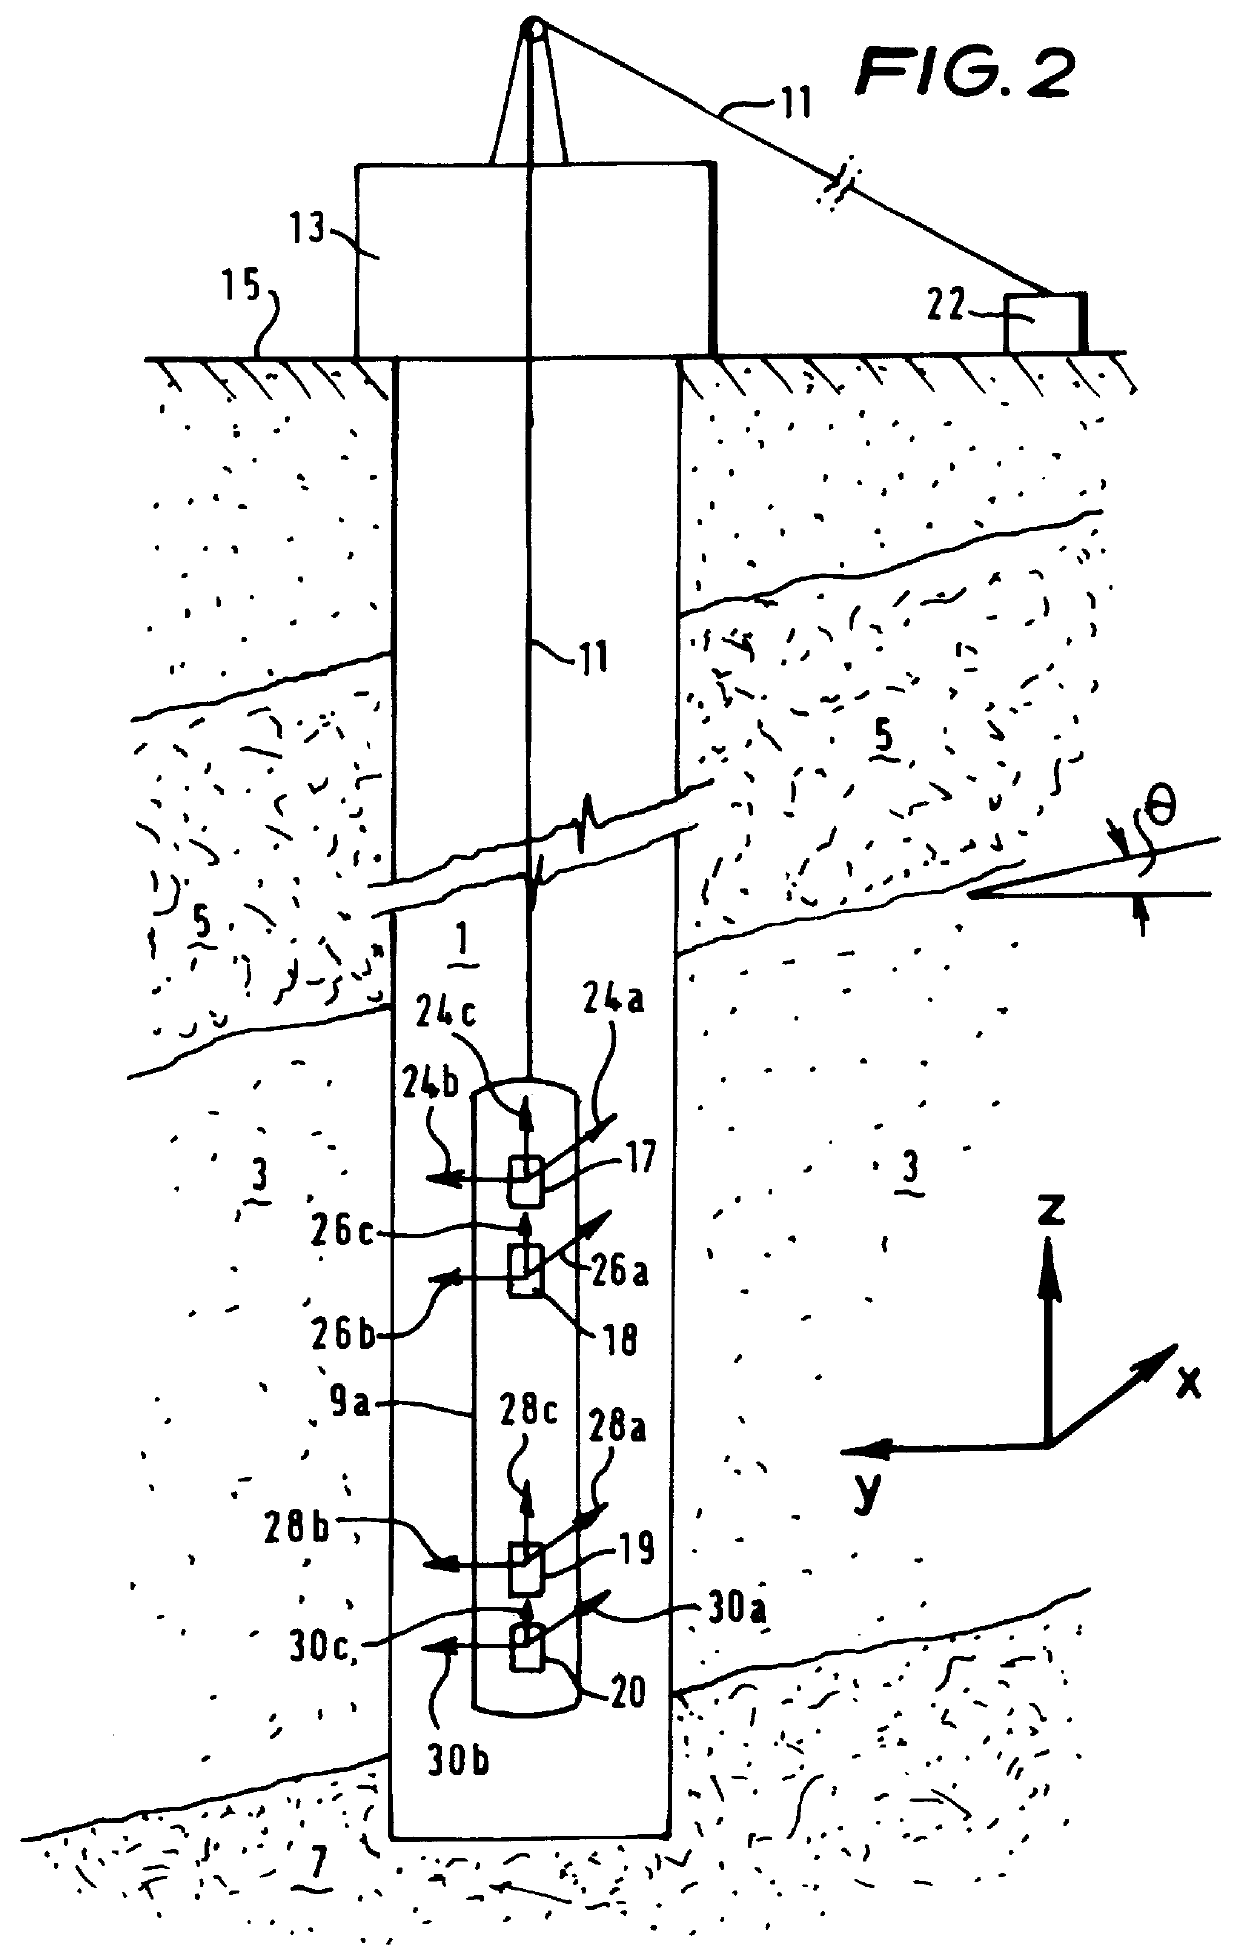 Determining electrical conductivity of a laminated earth formation using induction logging